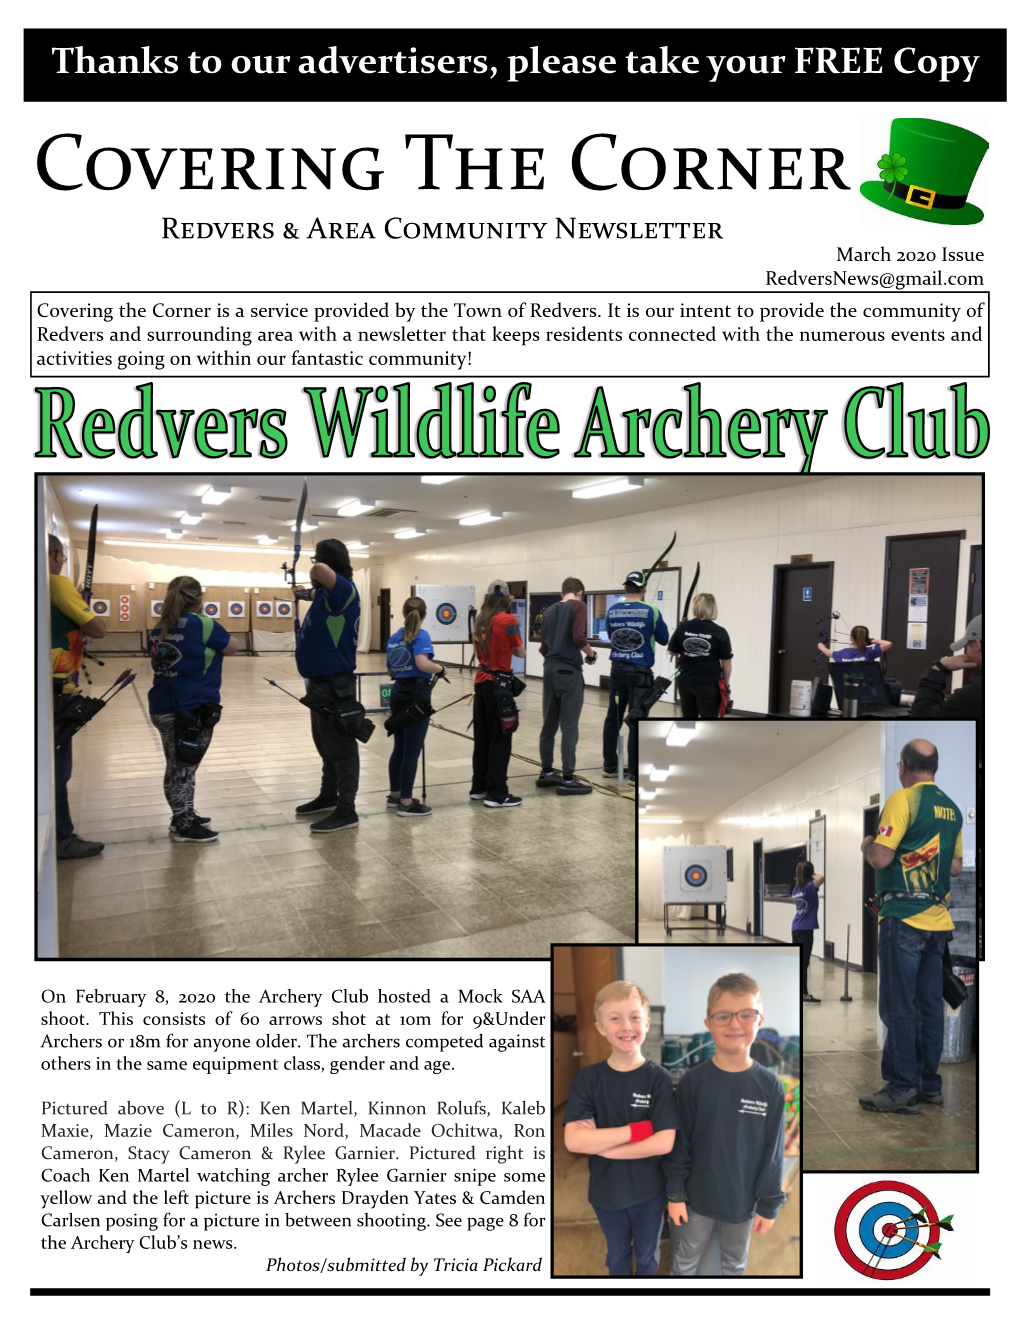 March 2020 Issue Redversnews@Gmail.Com Covering the Corner Is a Service Provided by the Town of Redvers